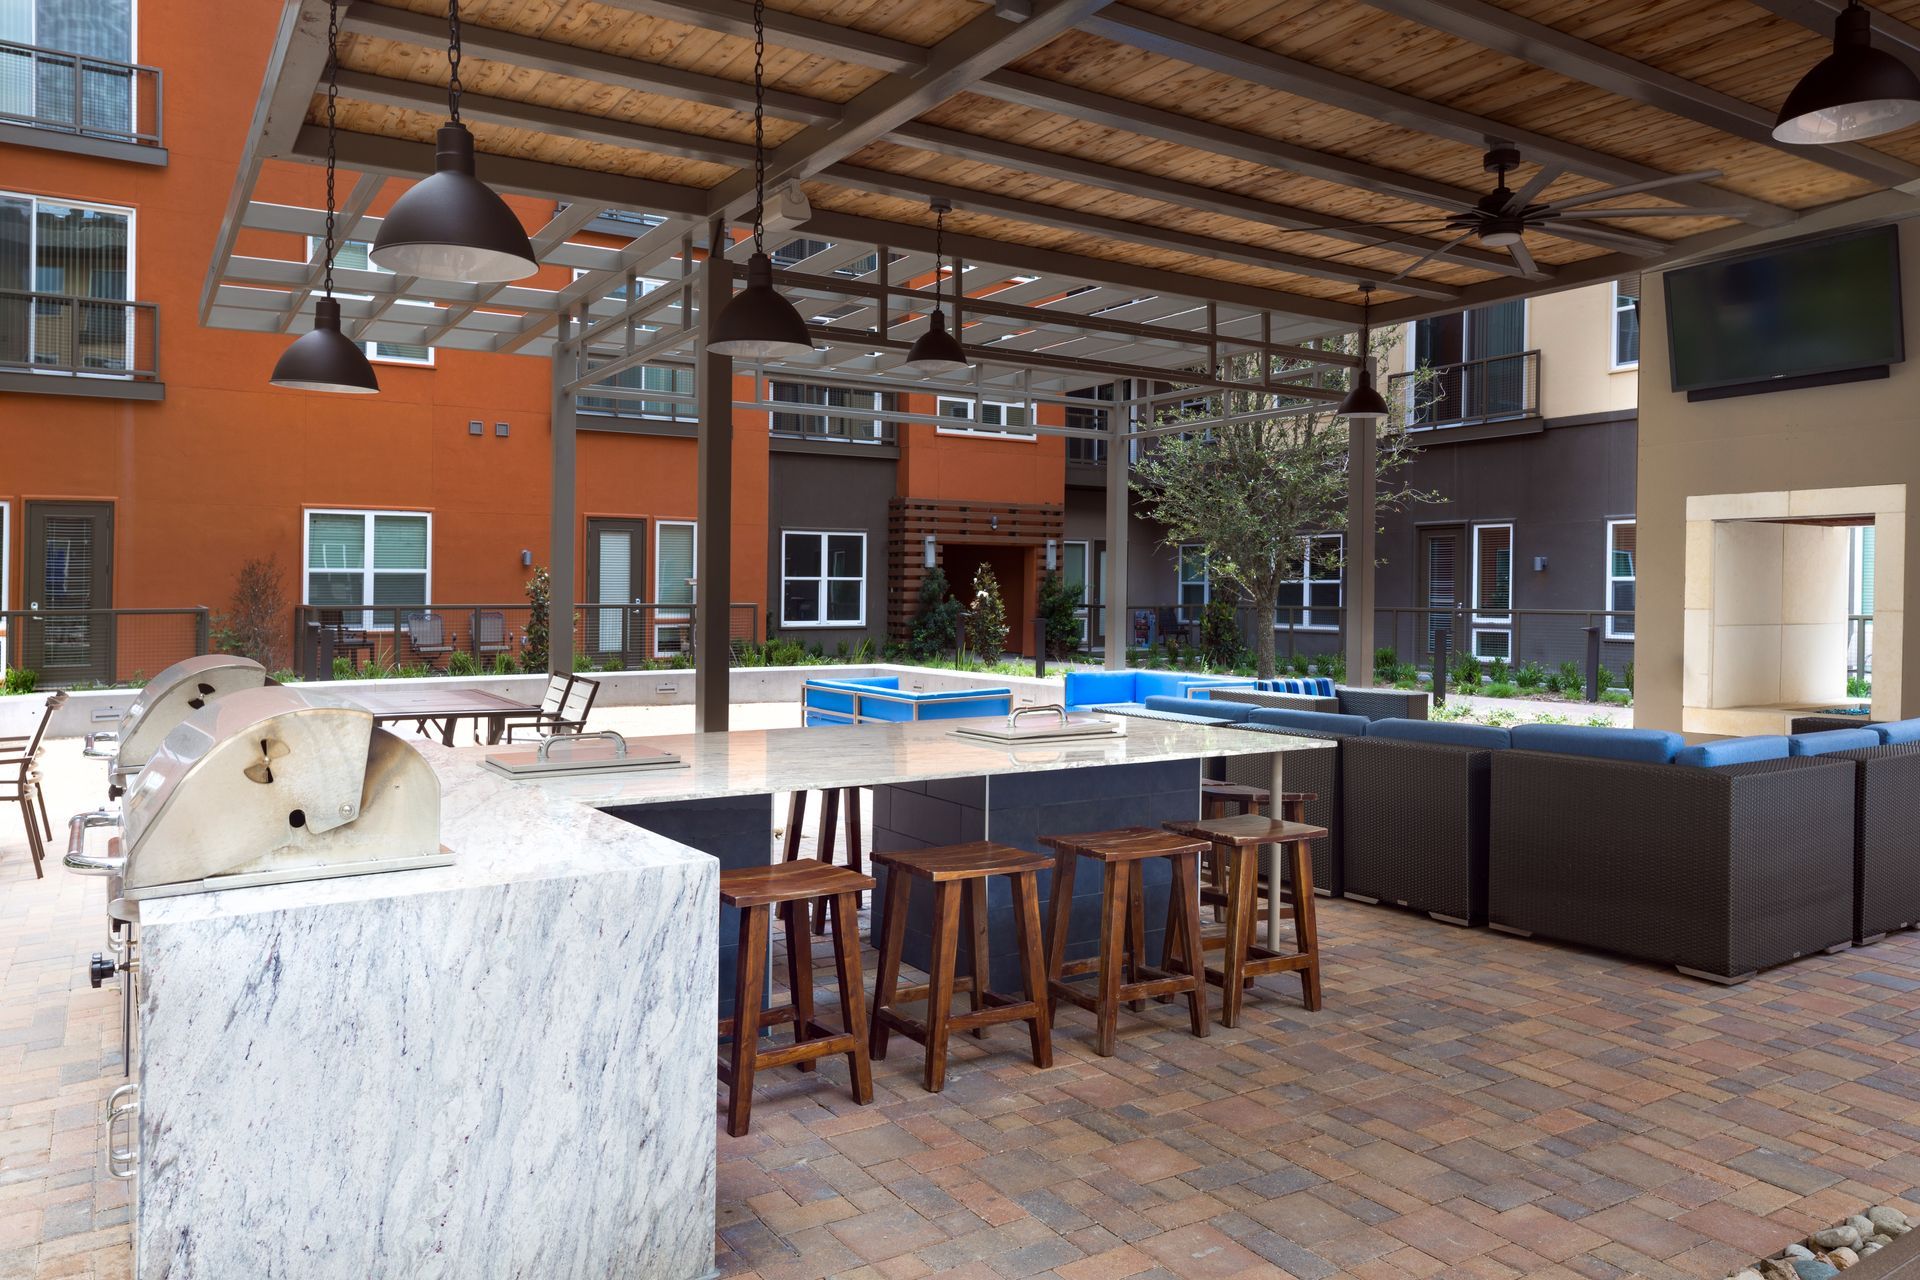 A large patio area with a grill and stools at Parkside at Craig Ranch.